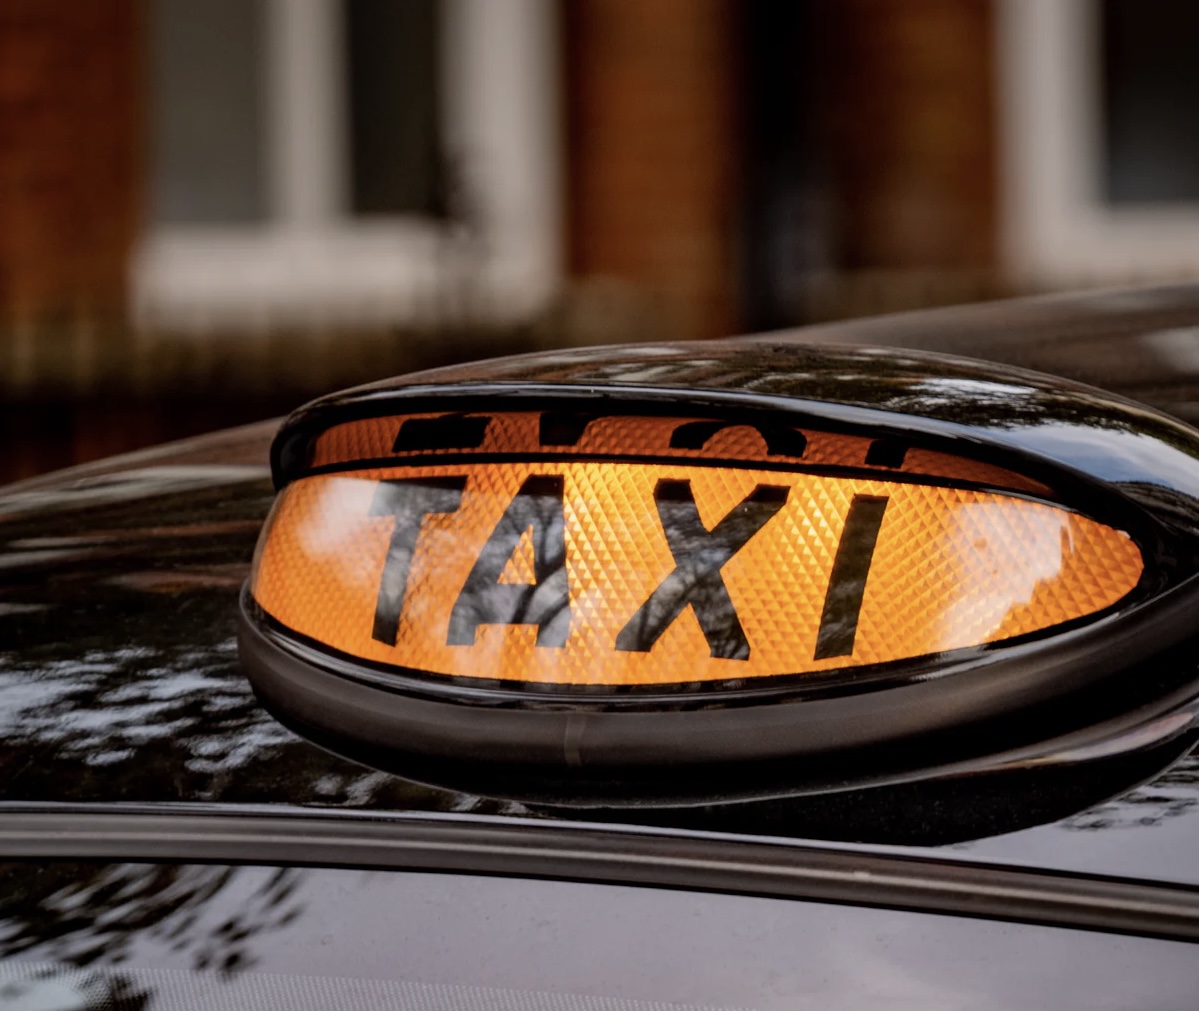 NEWS | New laws to protect disabled people from being charged over the odds when using taxis and private hire vehicles